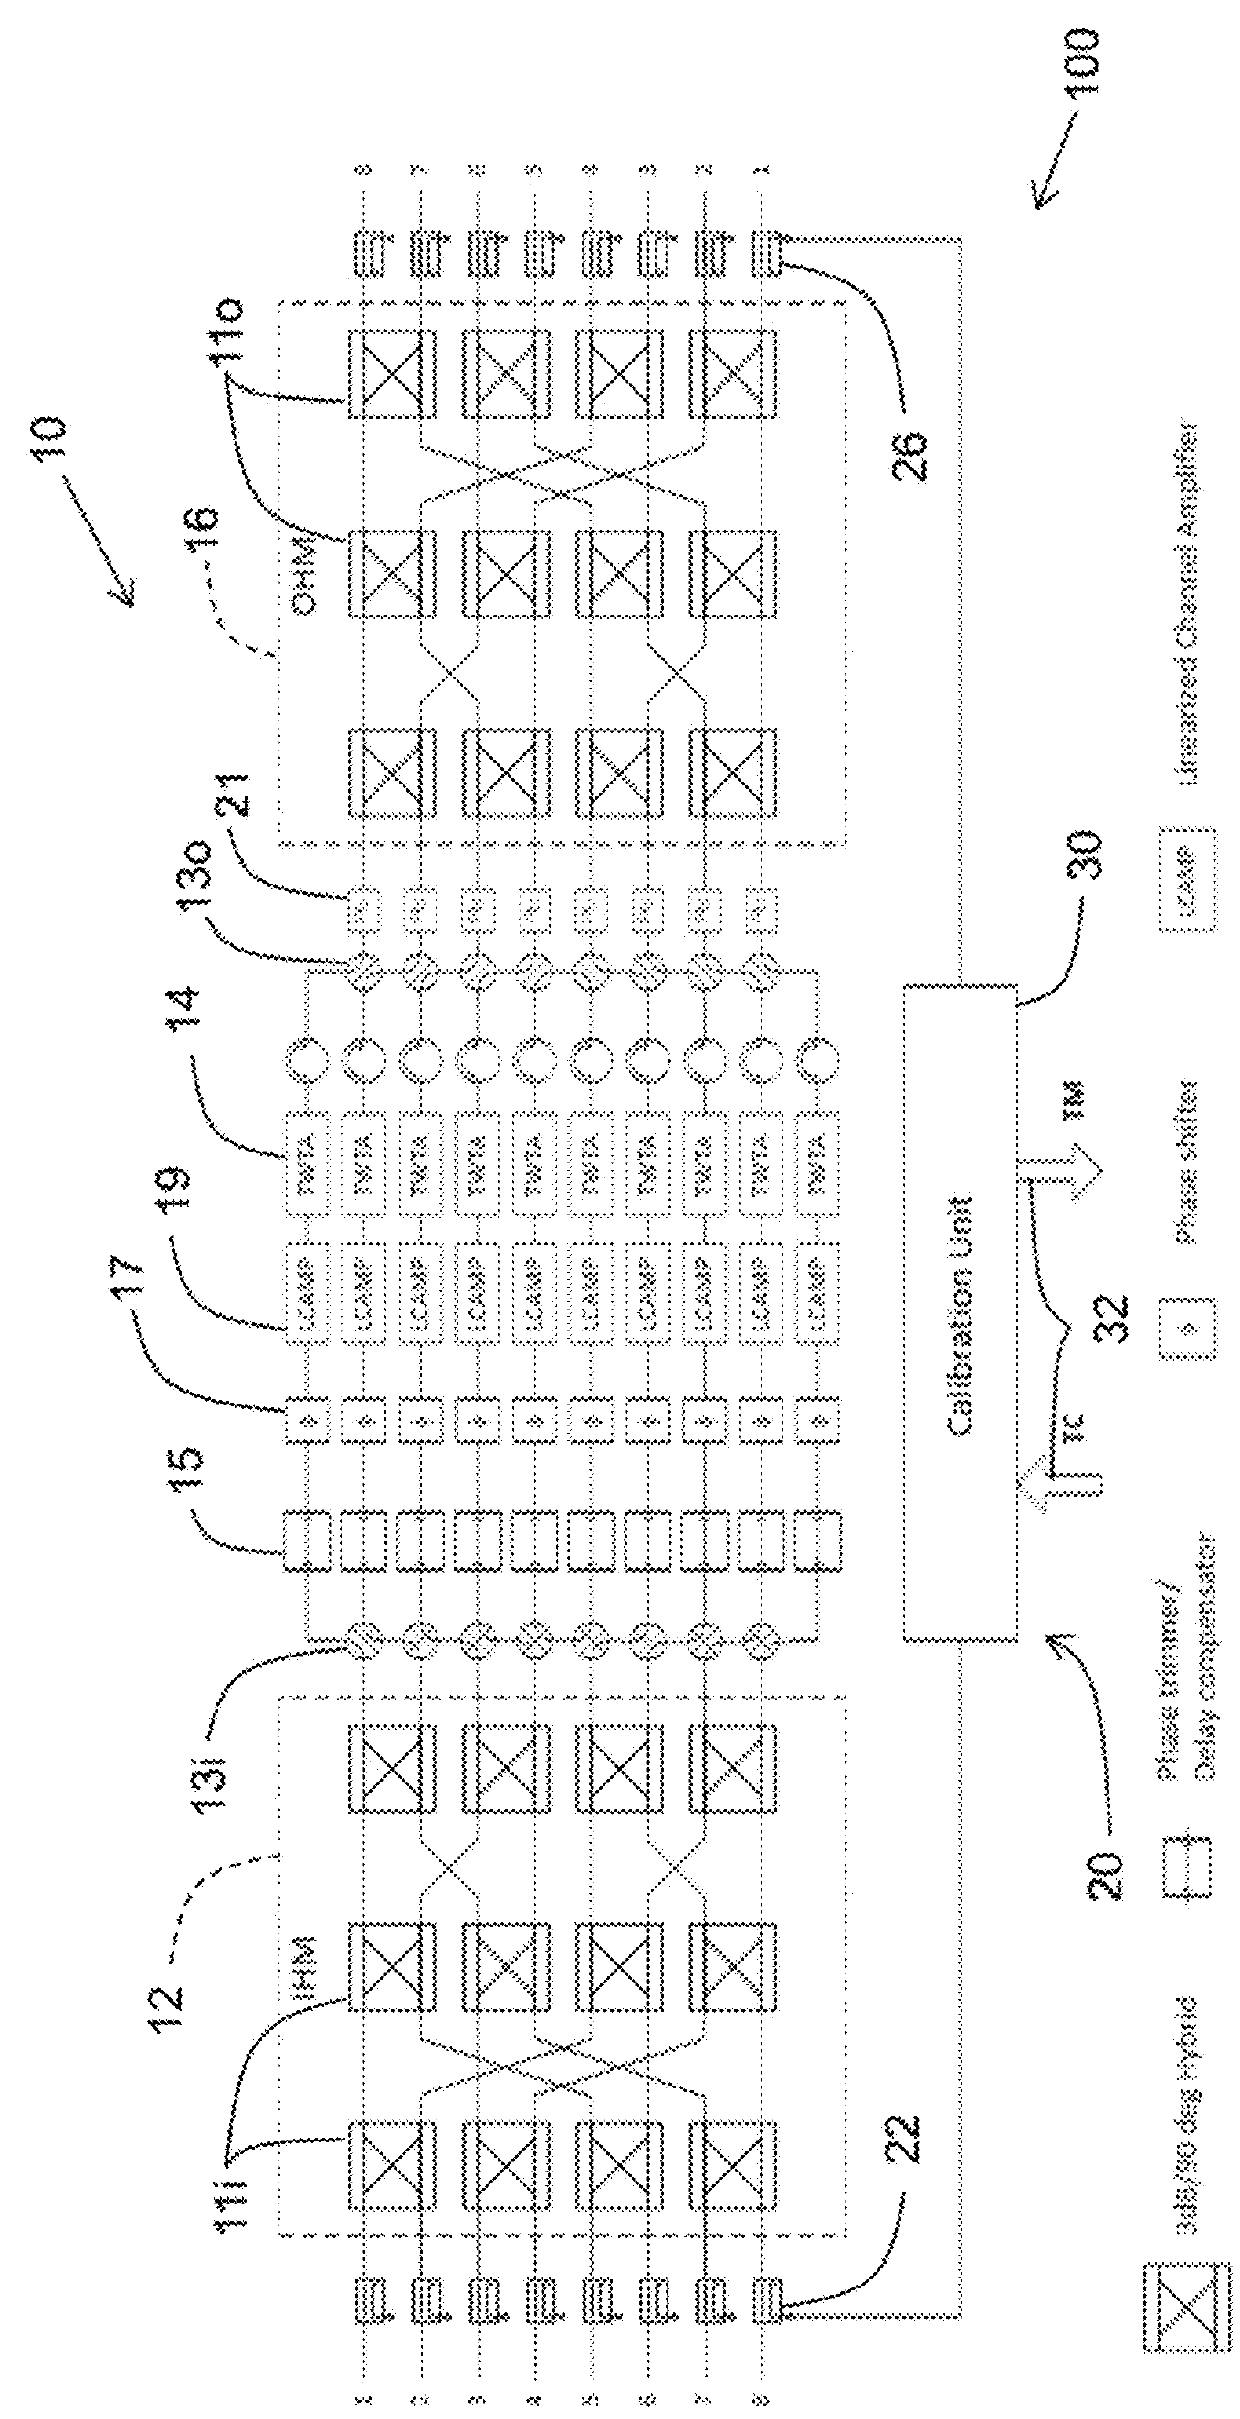 Calibration system and method for optimizing leakage performance of a multi-port amplifier